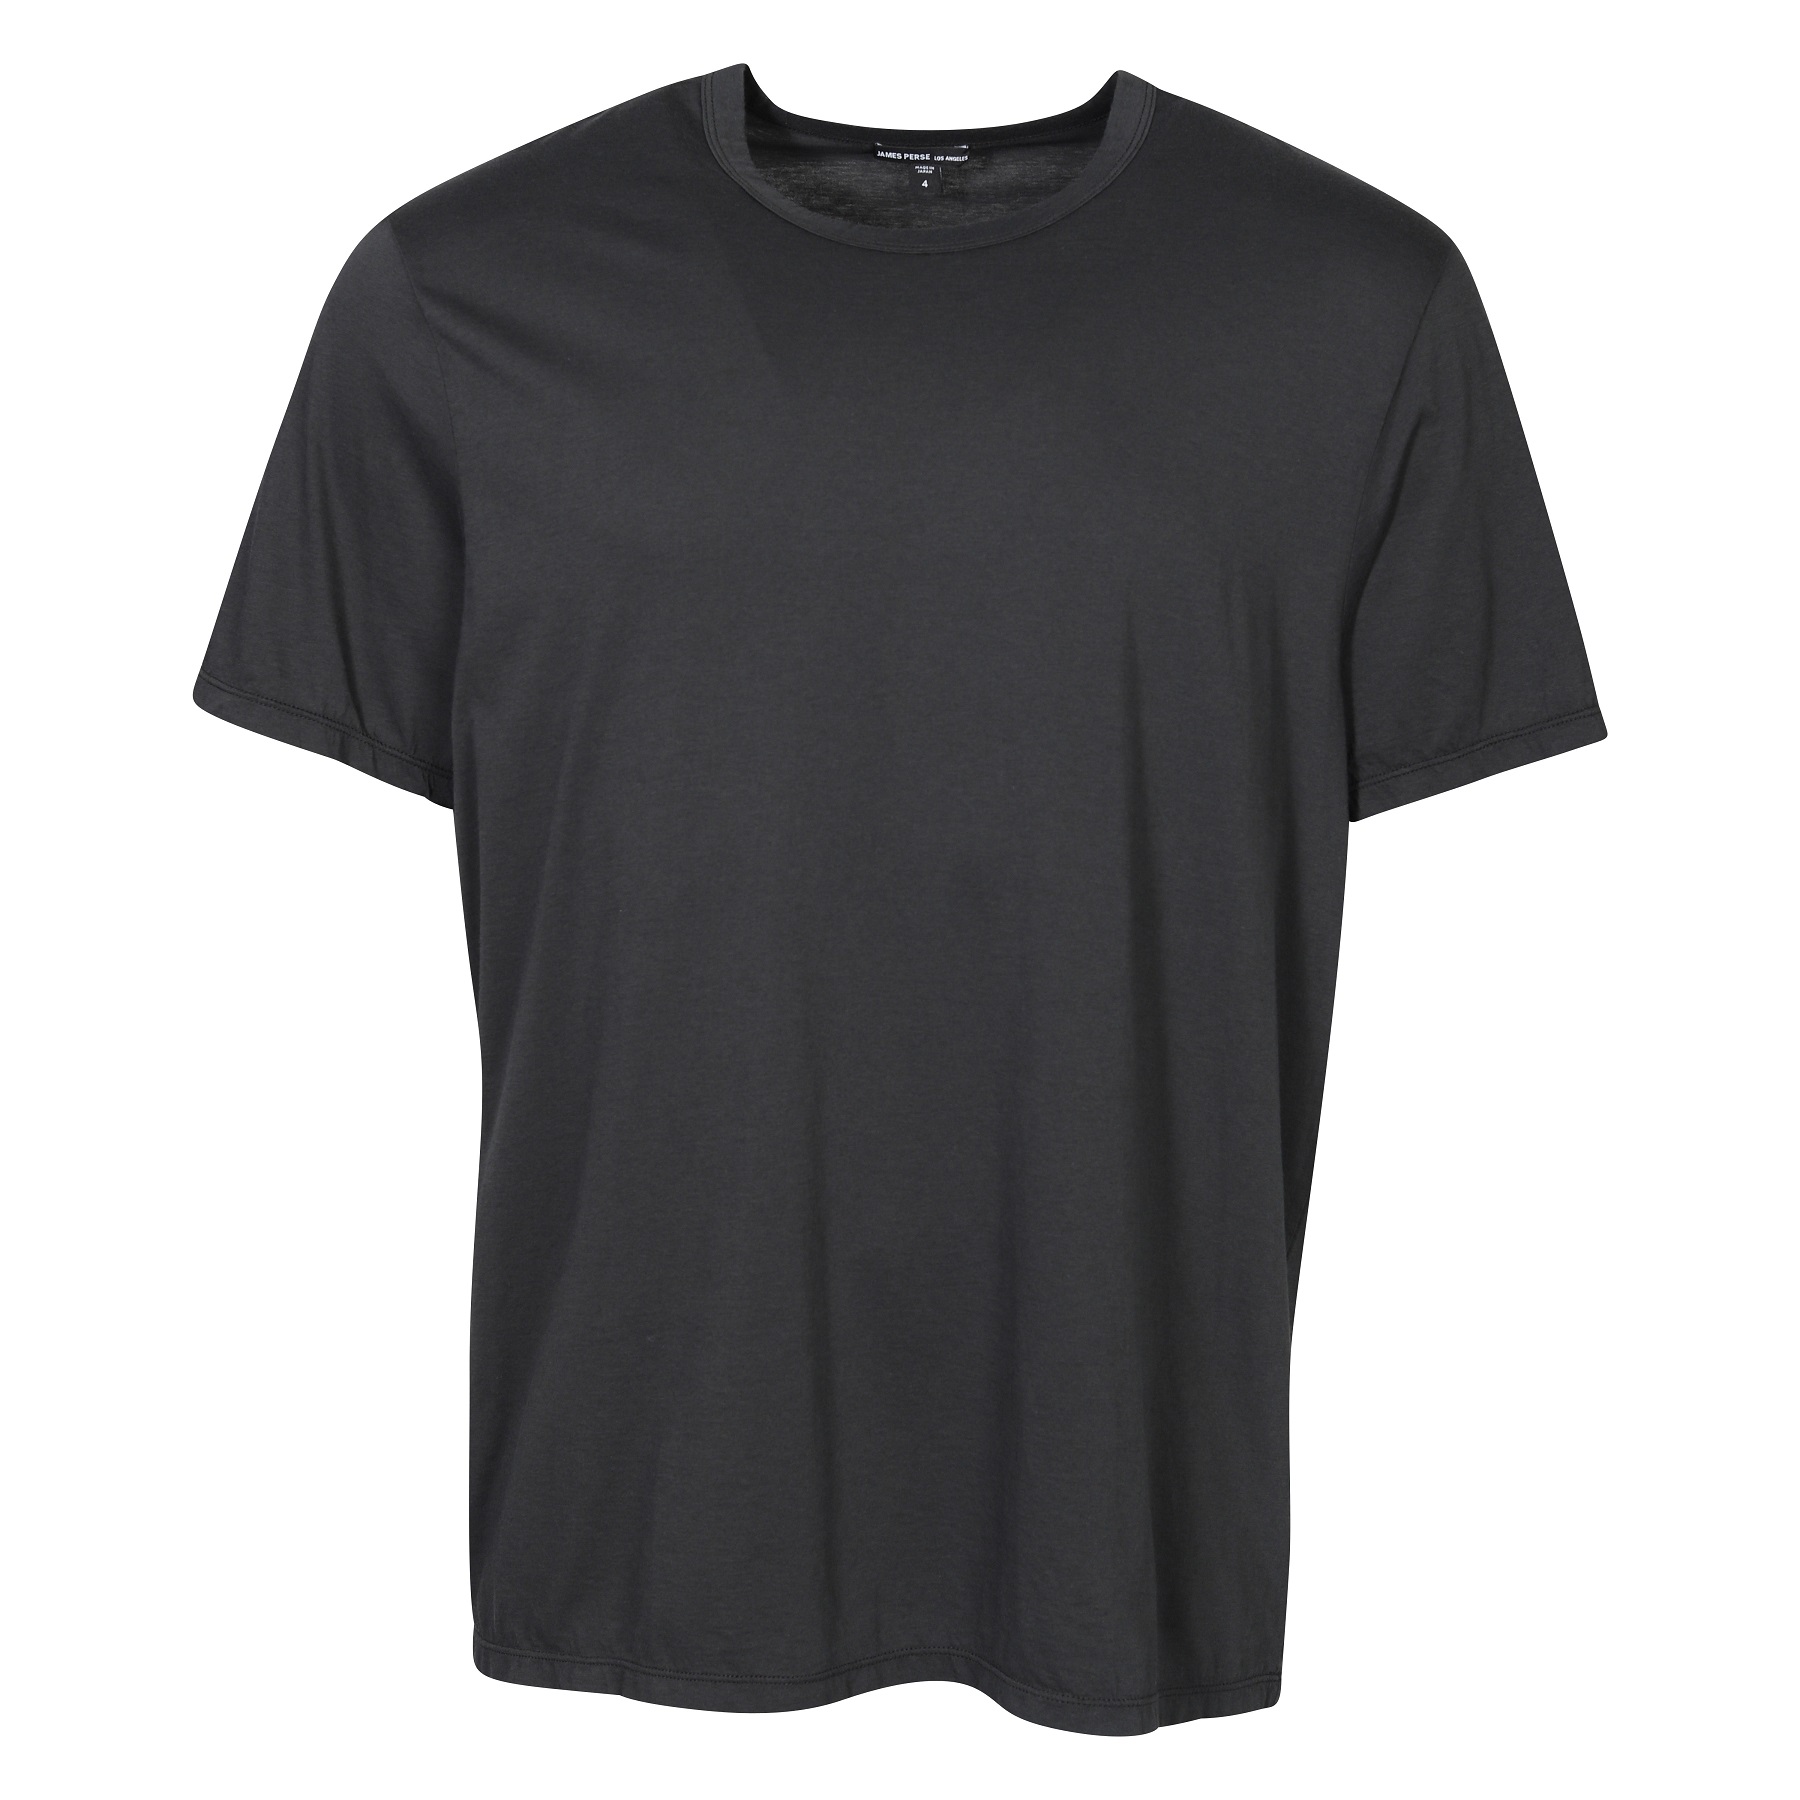 James Perse Elevated Lotus Jersey T-Shirt in Carbon 1/S